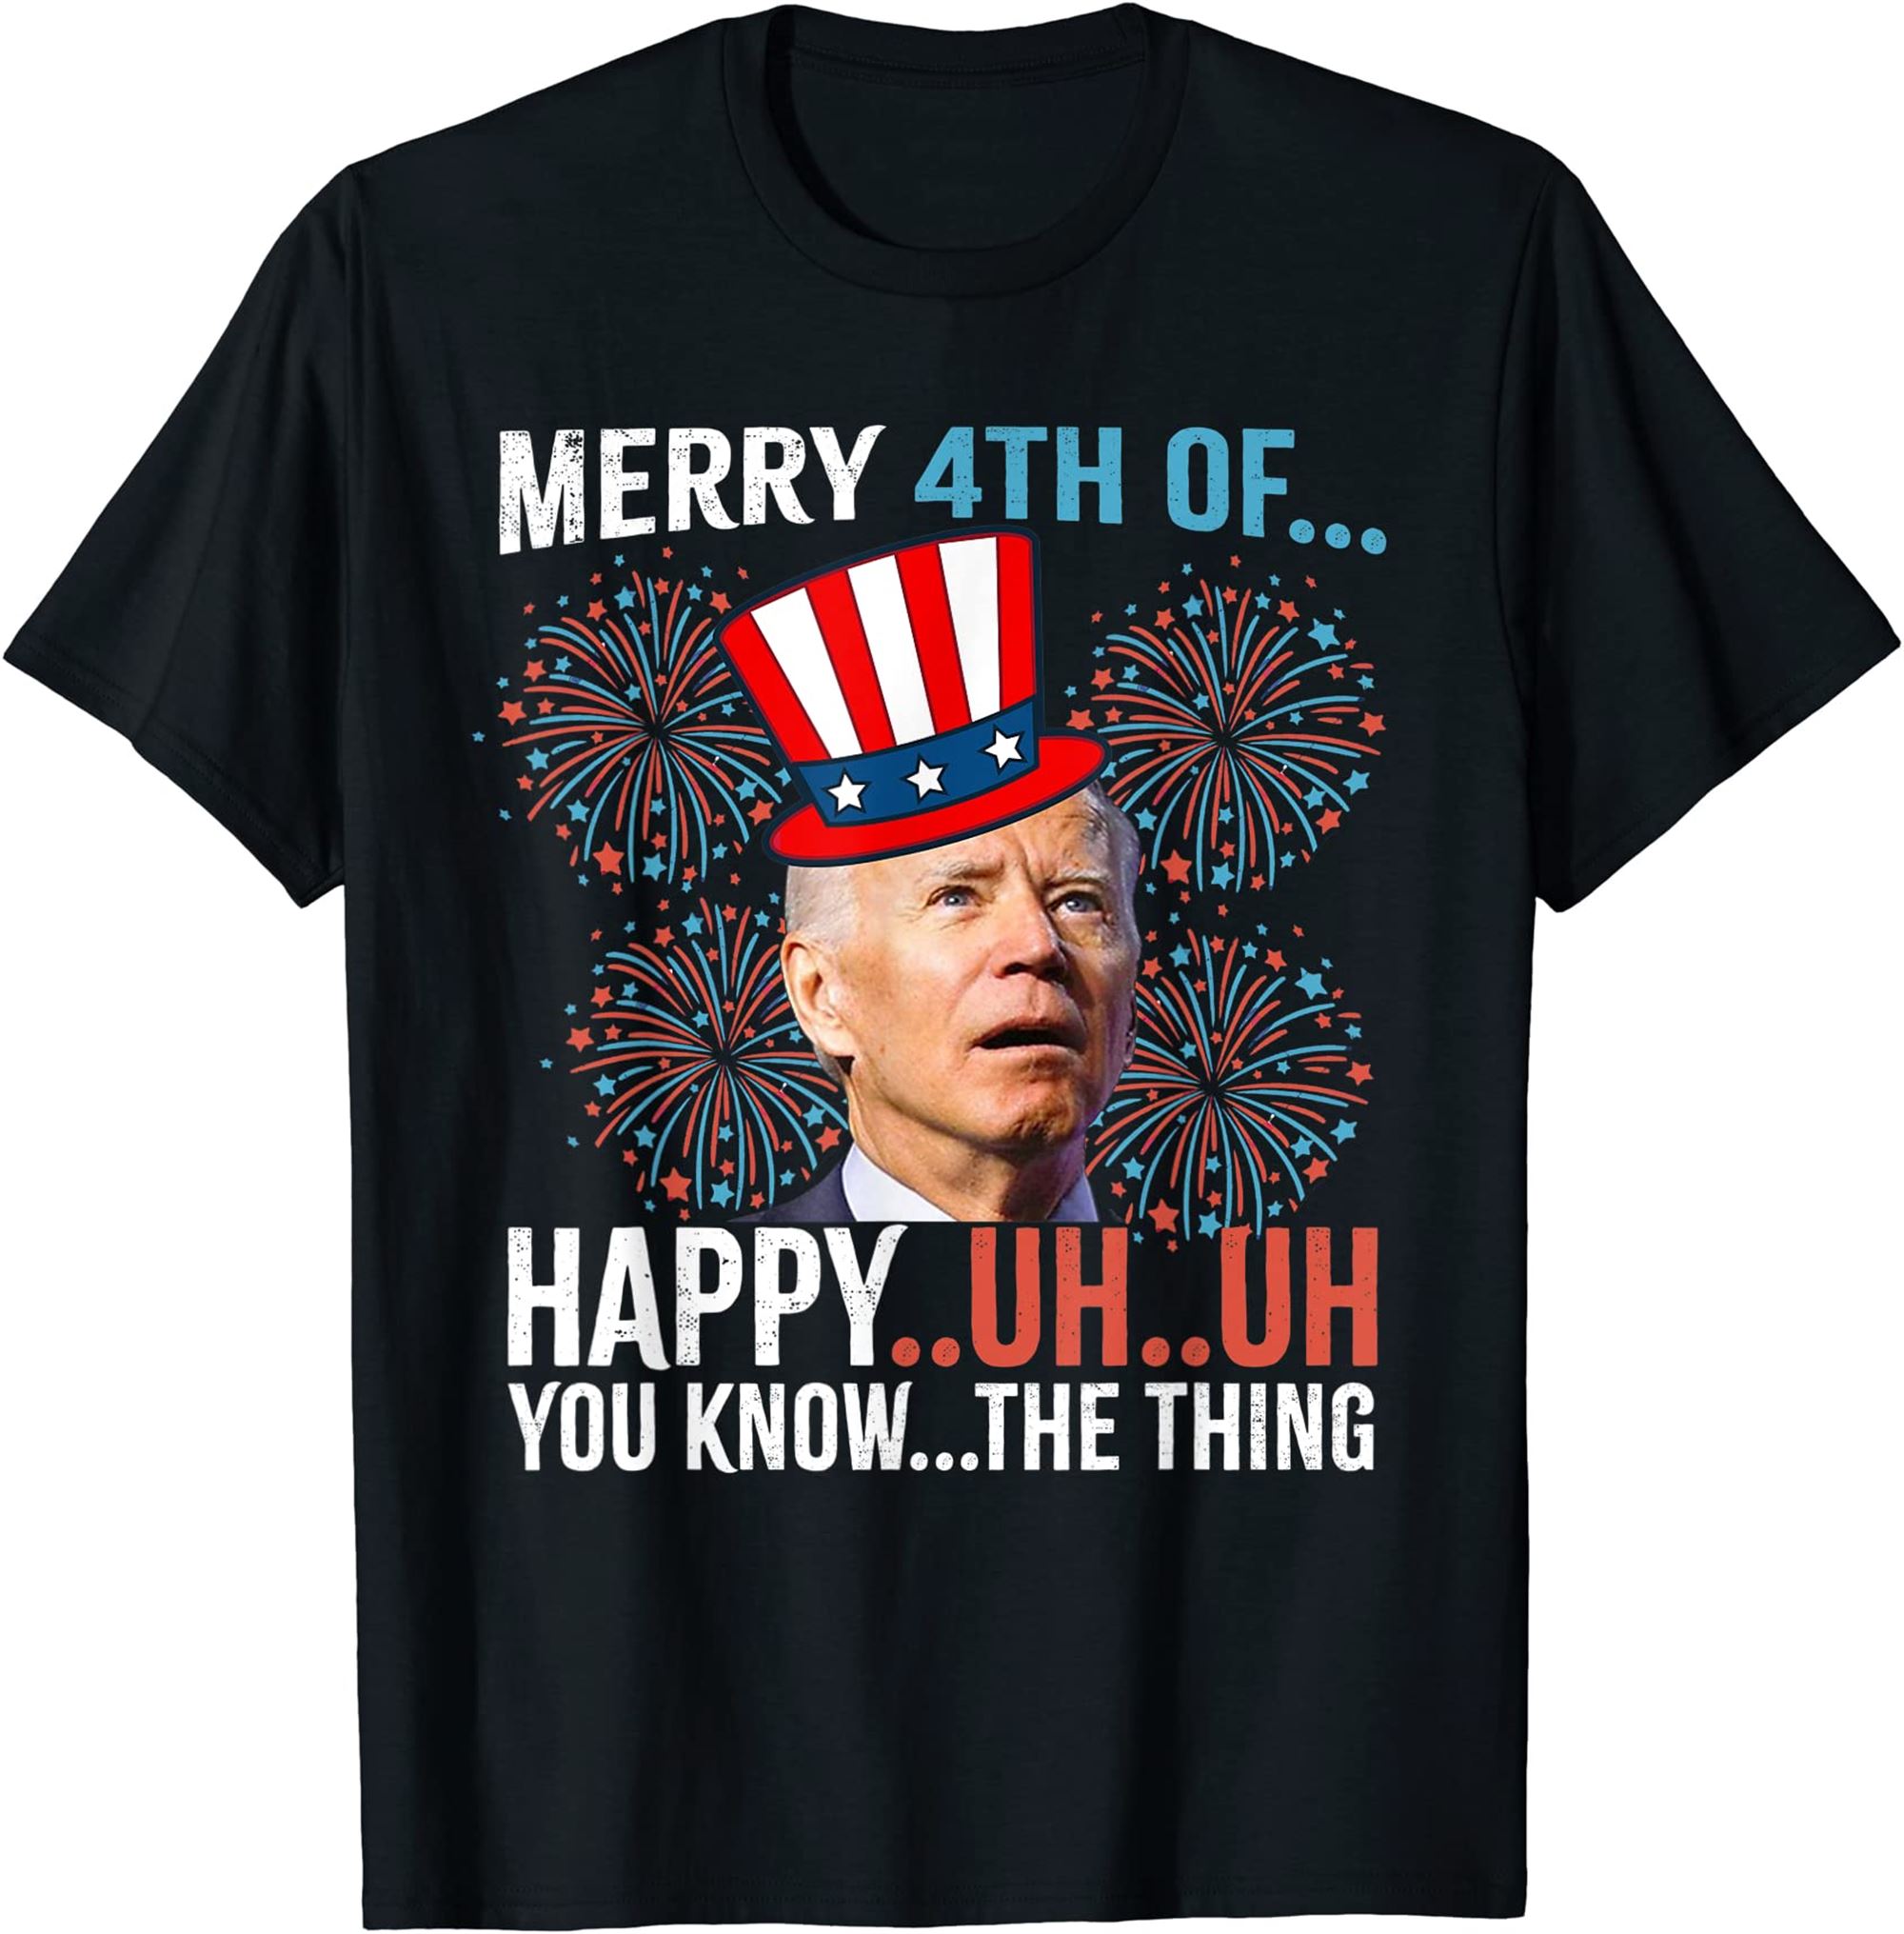 Merry 4th Of Happy Uh Uh You Know The Thing Funny 4 July T-shirt Full Size Up To 5xl